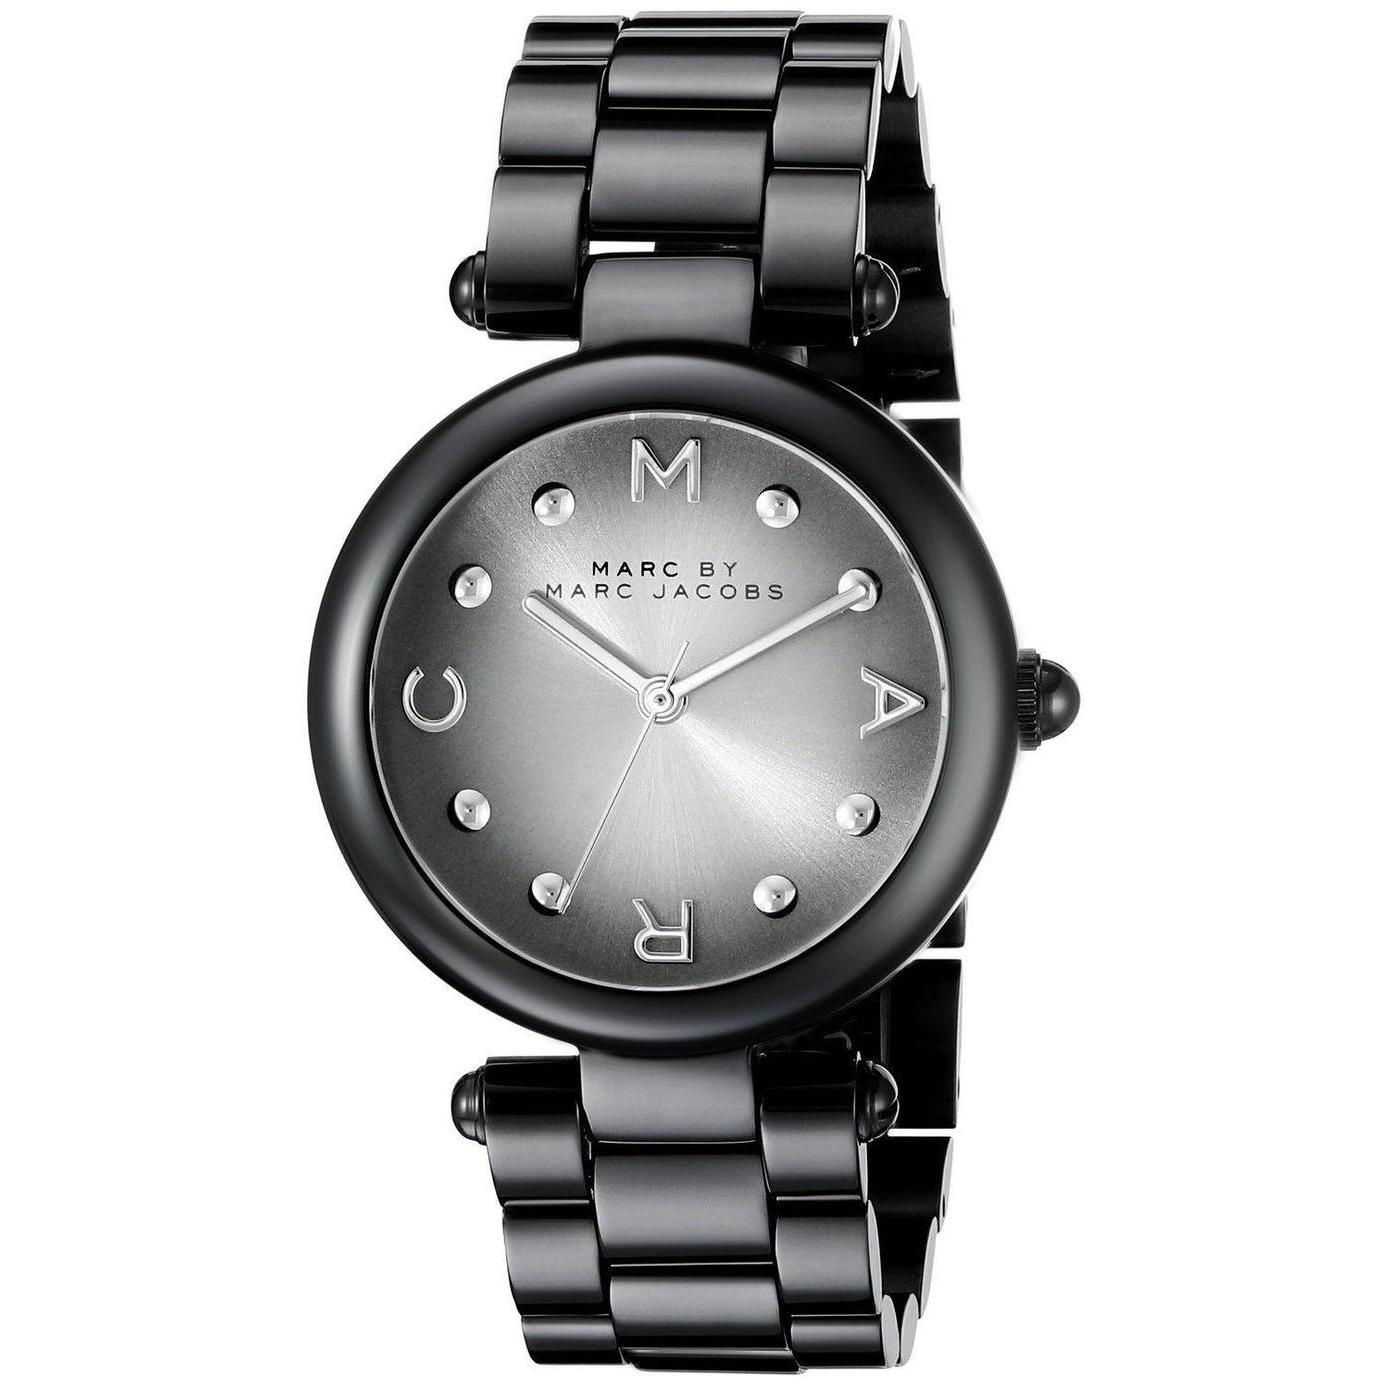 If you are looking Marc by Marc Jacobs "Dotty" Black Bracelet Women's Watch MJ3450 you can buy to tri-state, It is on sale at the best price